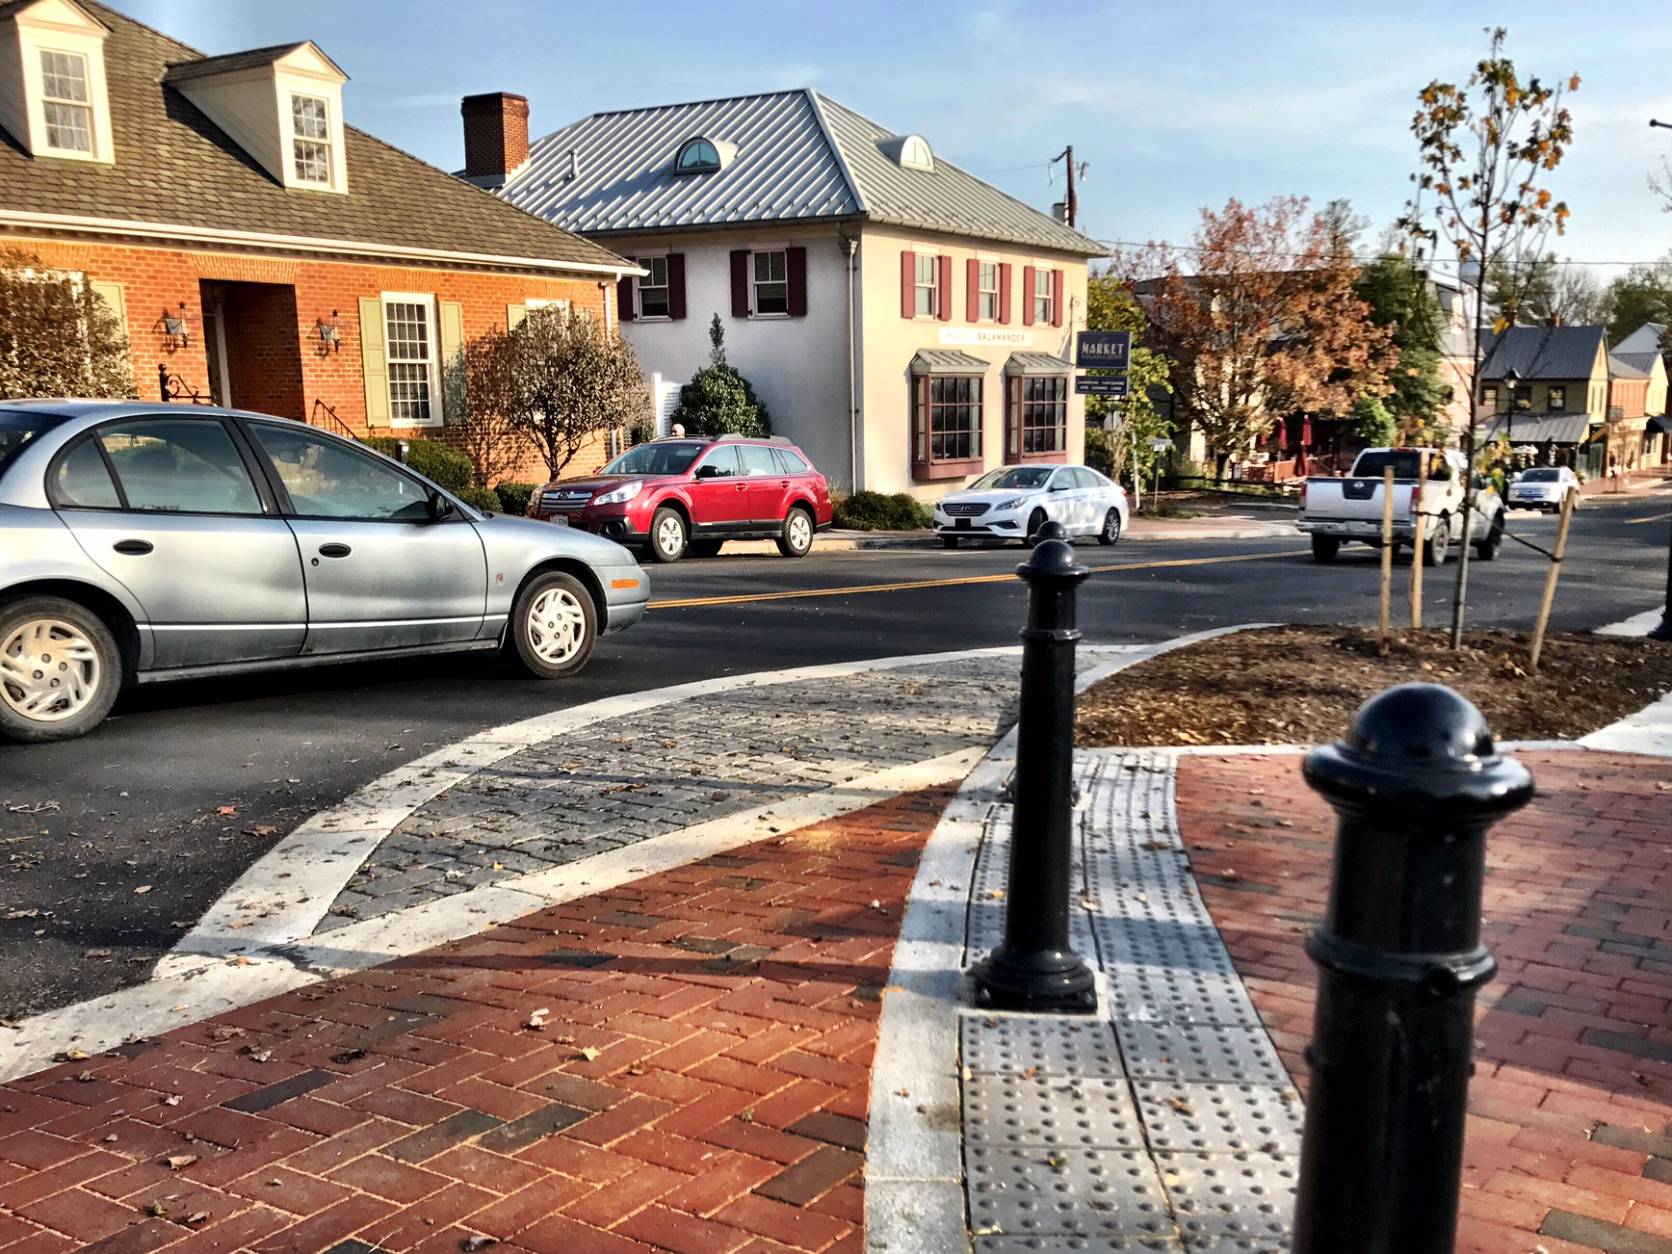 The $4.2 million project uses subtle design features to minimize speeds through the pedestrian zone, including crosswalks made of bricks, rather than the asphalt used on Washington Street. (WTOP/Neal Augenstein)